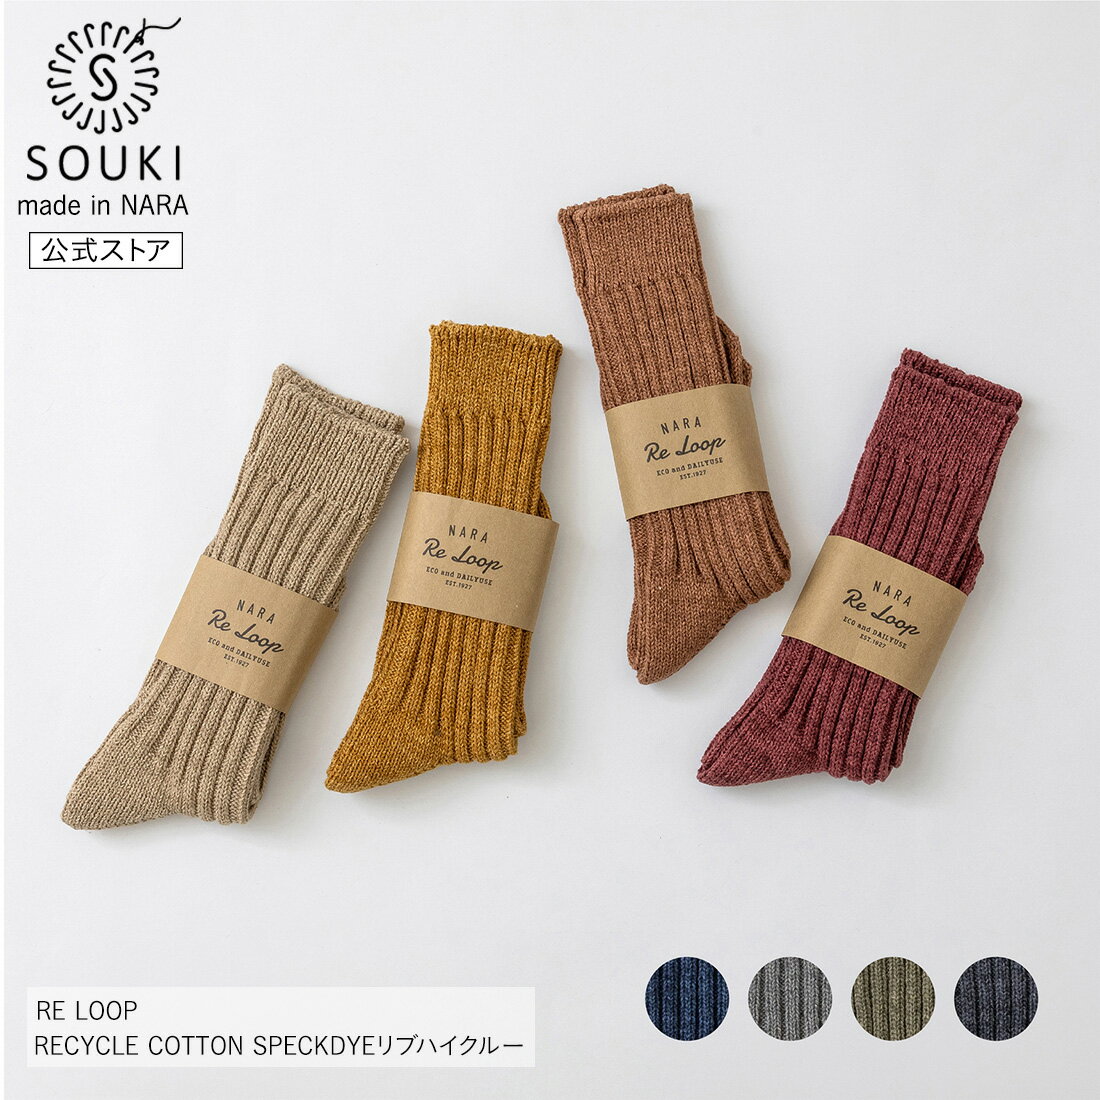 【30％OFF】【奈良の靴下】創喜-SOUKI- 公式/RE LOOP/RECYCLE COTTON SPECKDYEリブハイクルー / 奈良 靴下 日本製 創喜 ソウキ メンズ レディース ギフト プレゼント 綿 リサイクルコットン ロ…